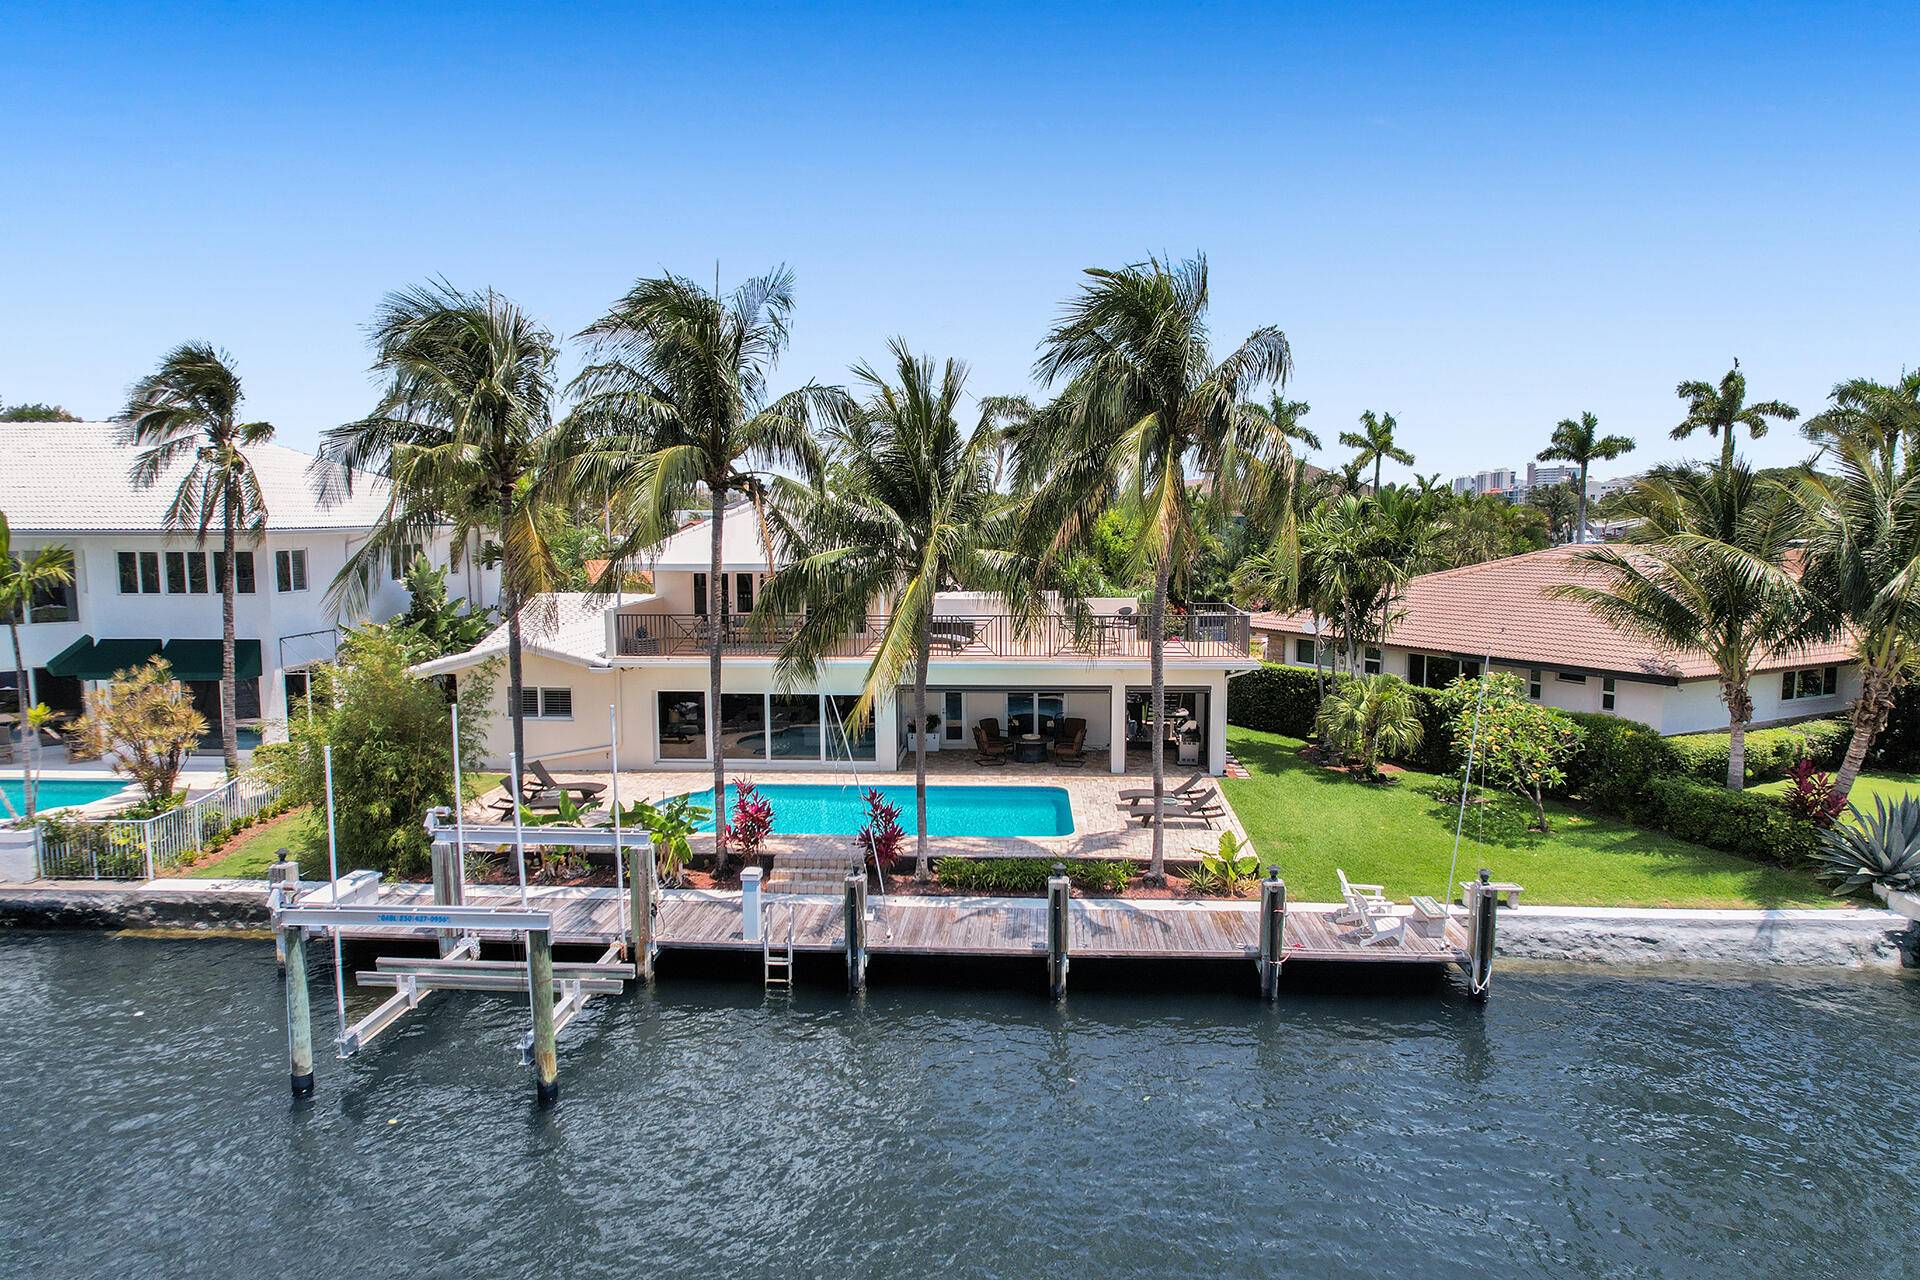 Beautifully reimagined 4 bedroom, waterfront home in the sought after Cove neighborhood.